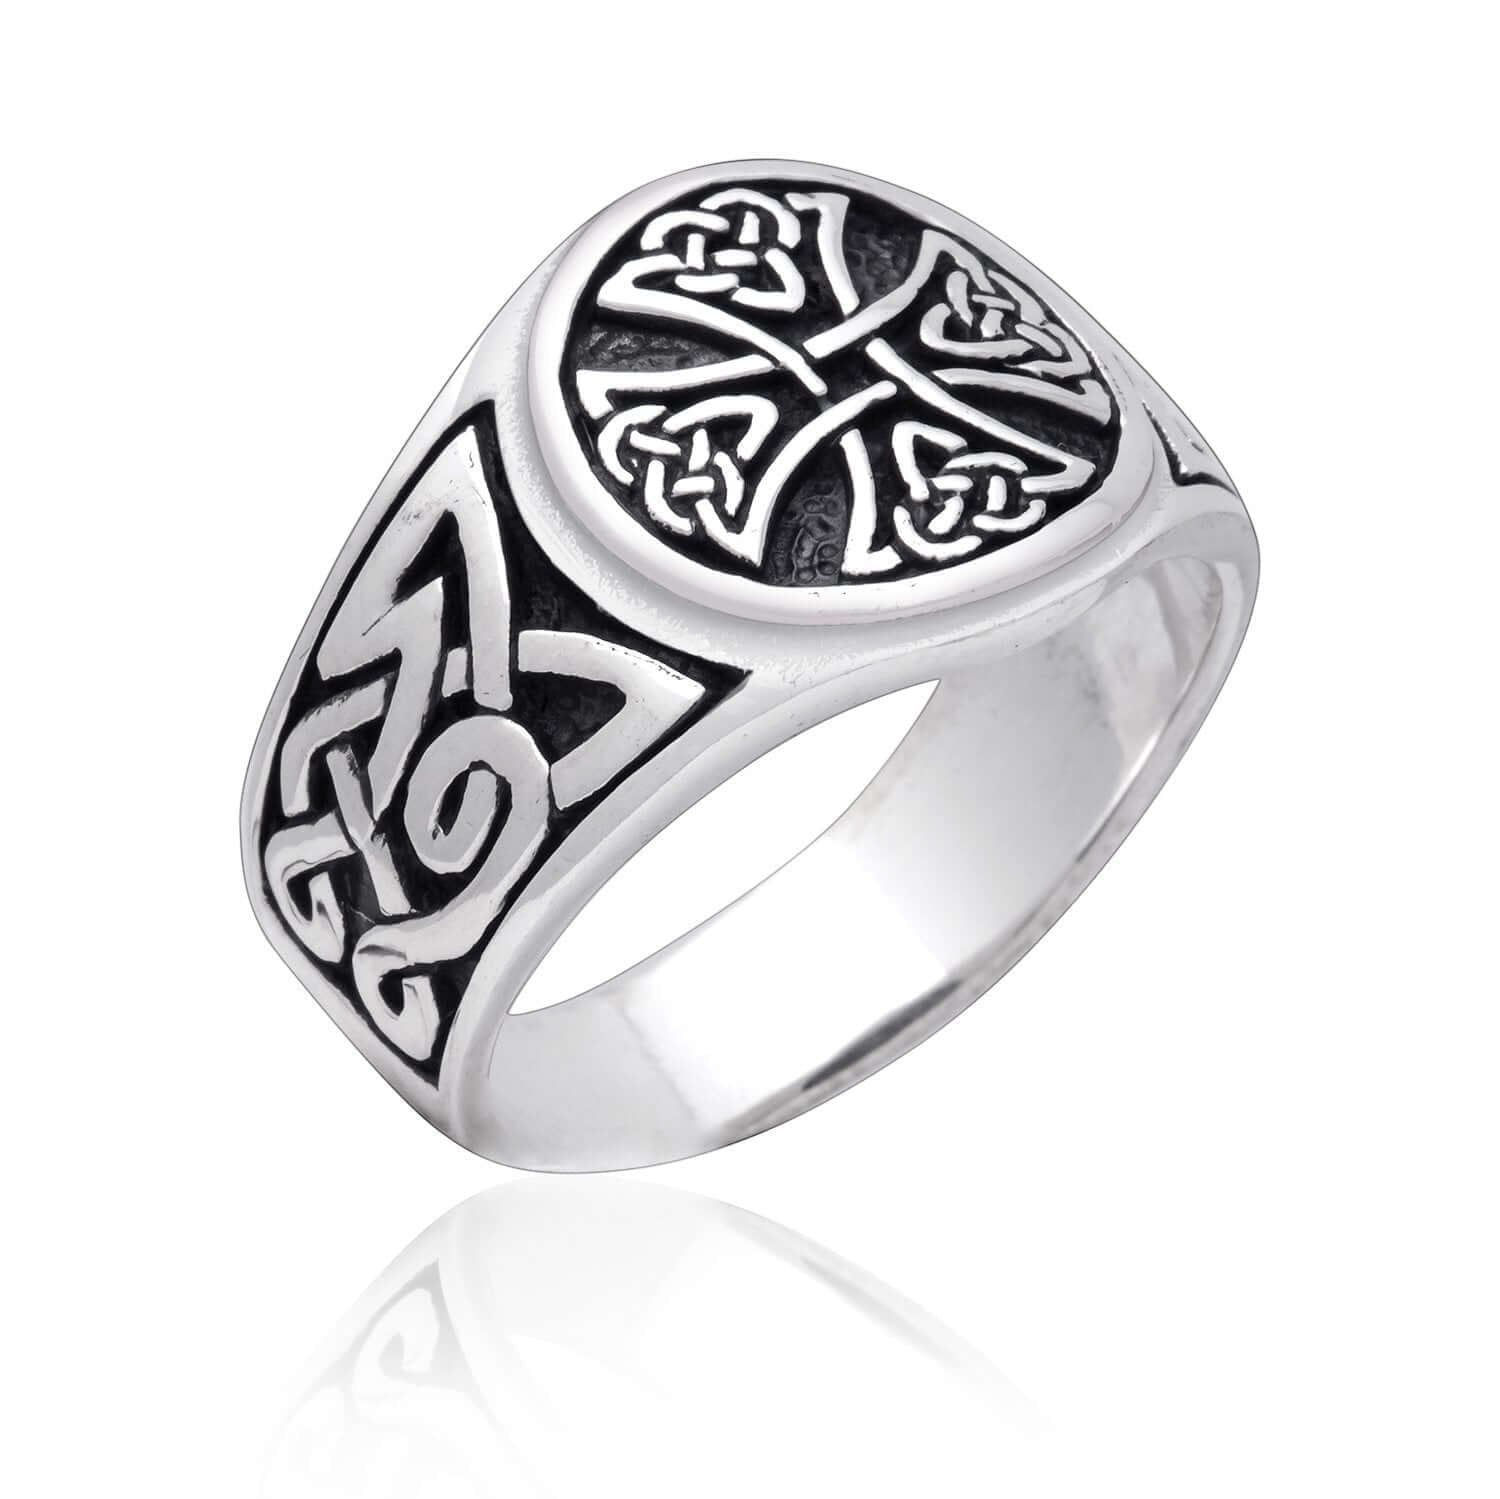 Sterling Silver Canterbury Cross Ring with Knotwork - SilverMania925